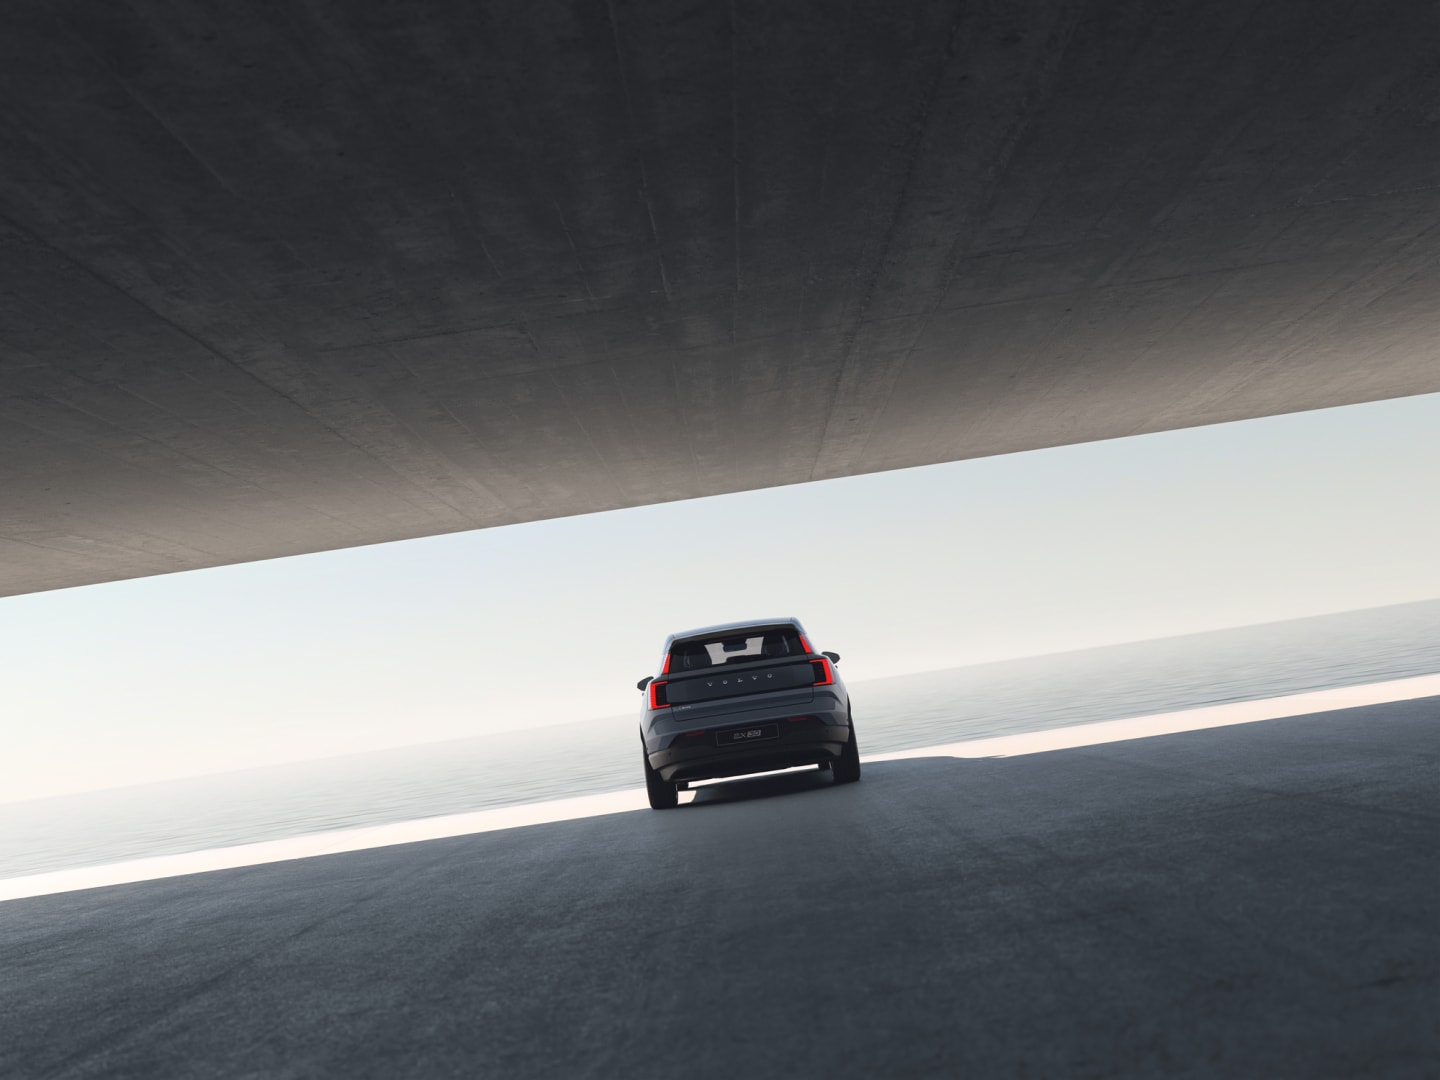  A rear view of a Volvo EX30 parked at the edge of an open-sided concrete structure overlooking water.